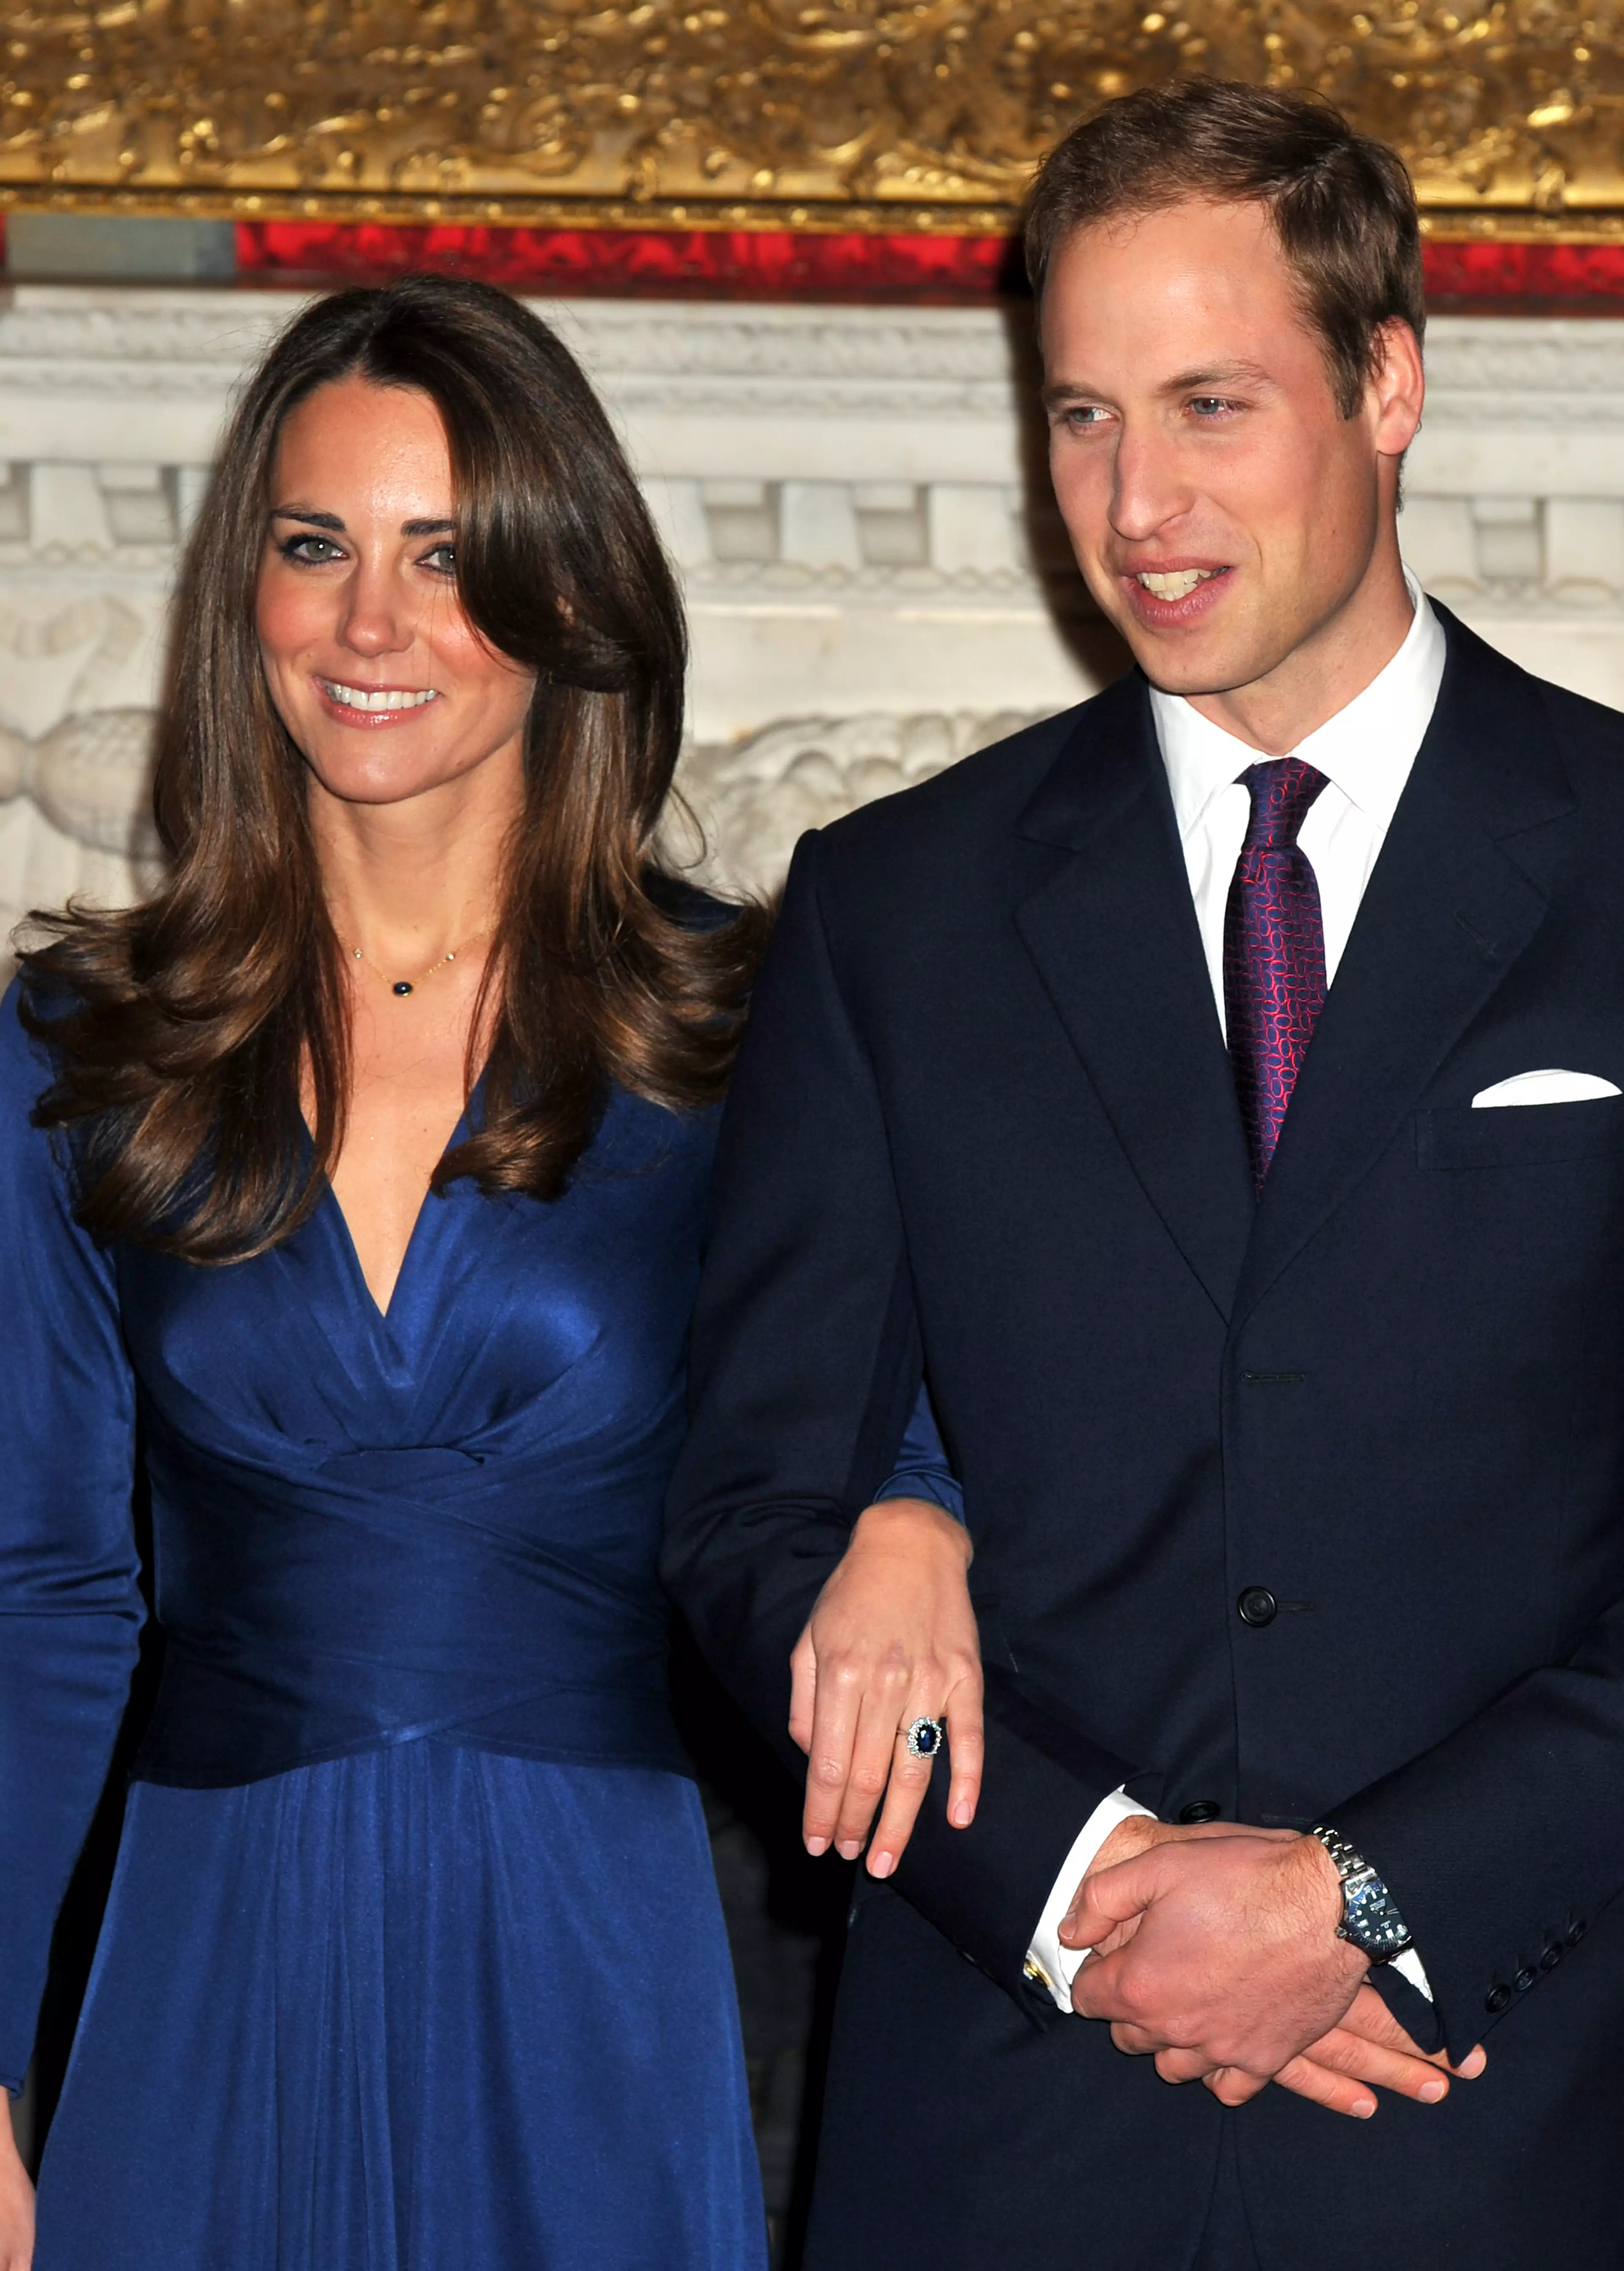 William and Kate got engaged in November 2010. Beaverbrooks is selling a Kate Middleton-inspired 18ct Gold Diamond Sapphire Cluster Ring for £3,750 (